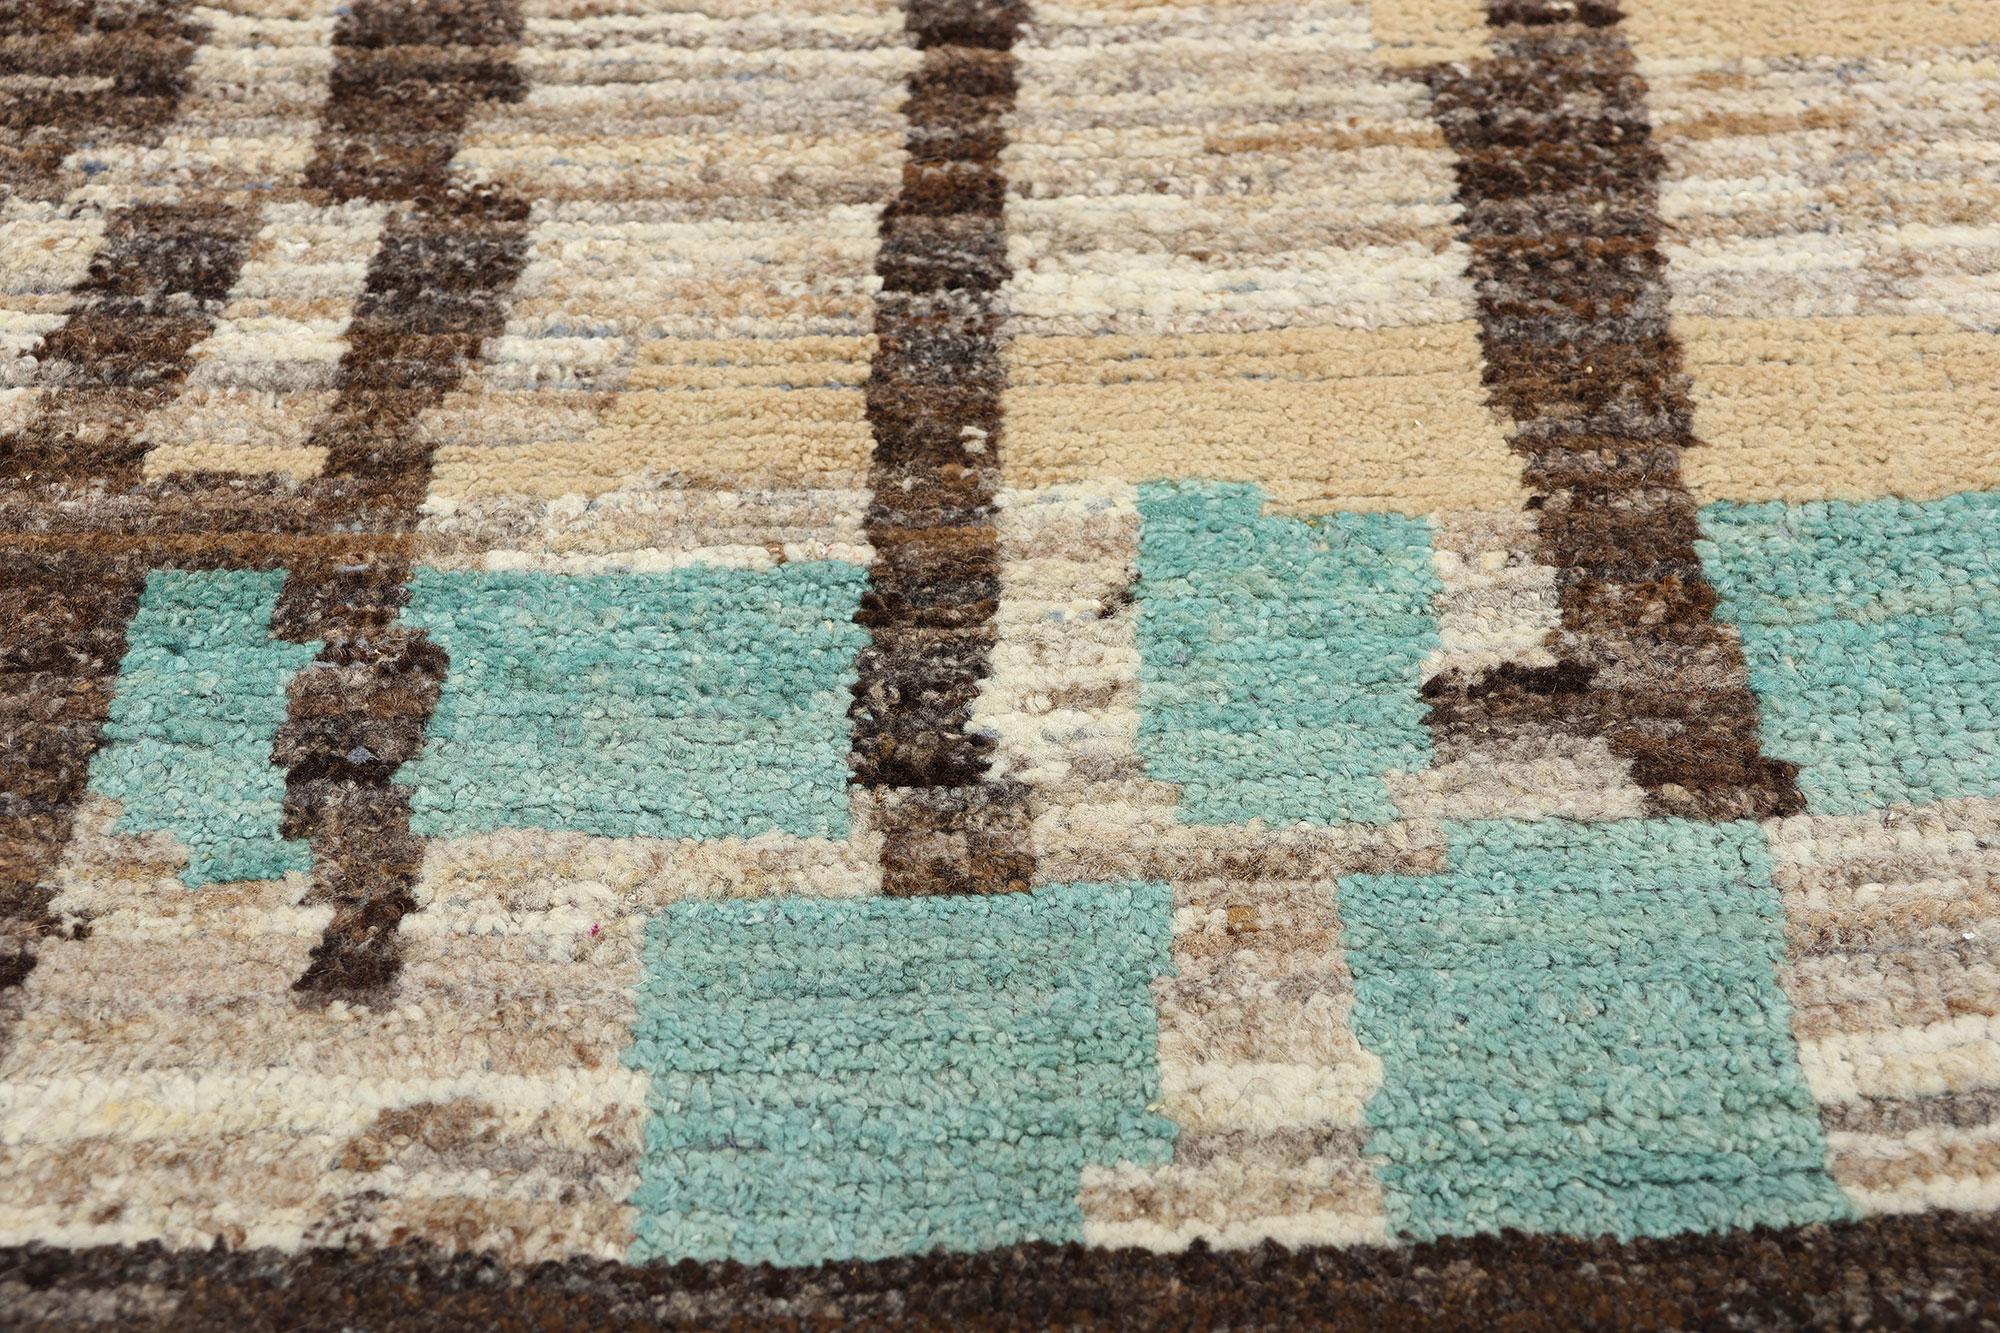 Organic Modern Brutalist Moroccan Rug, Biophilic Design Meets Brutalism In New Condition For Sale In Dallas, TX